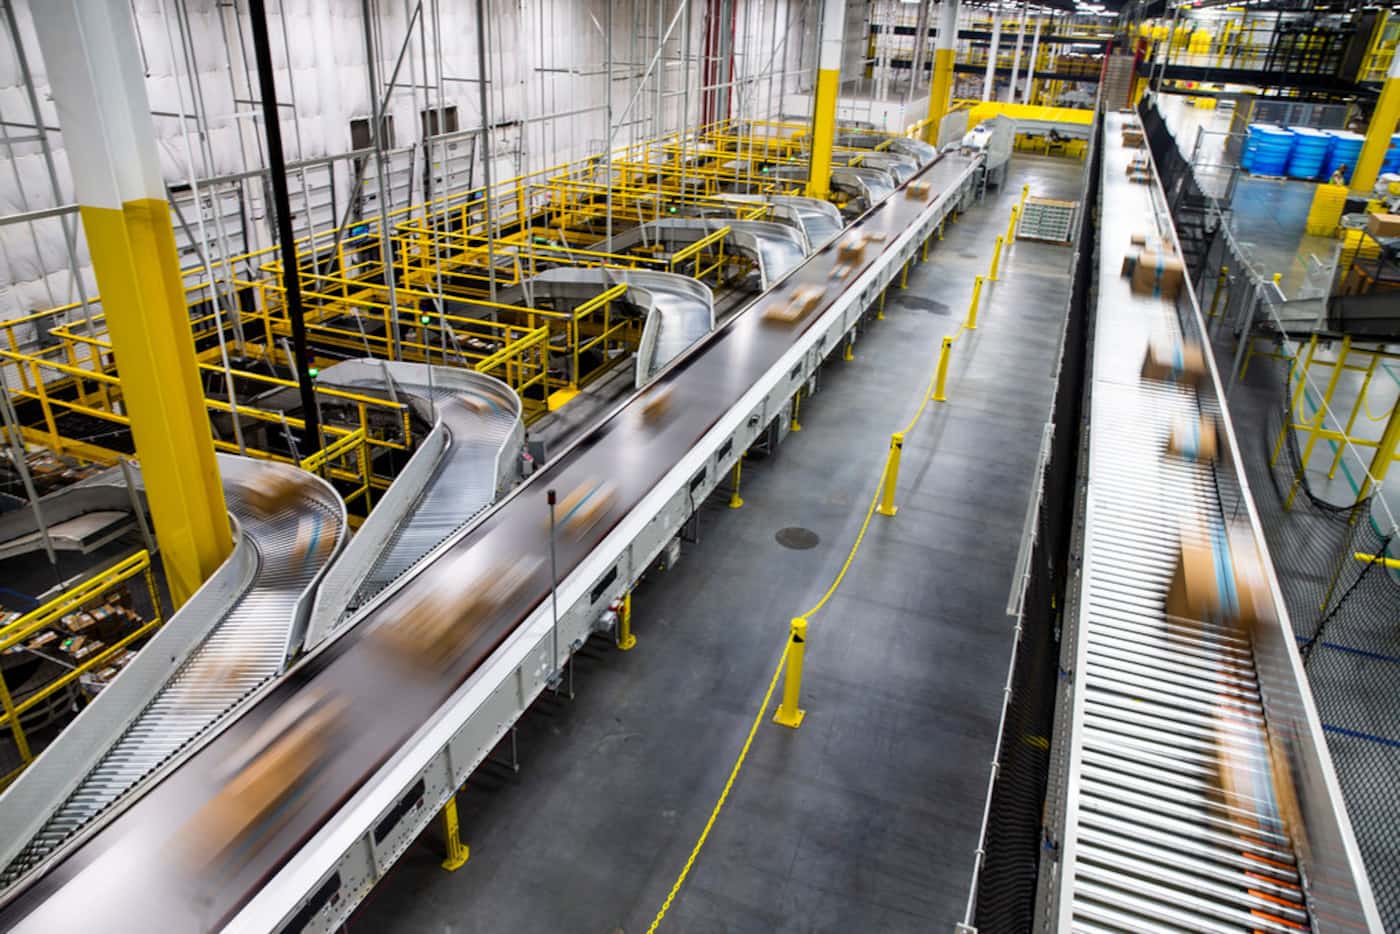 Packages move quickly along a conveyor belt in the 1-million-square-foot center.